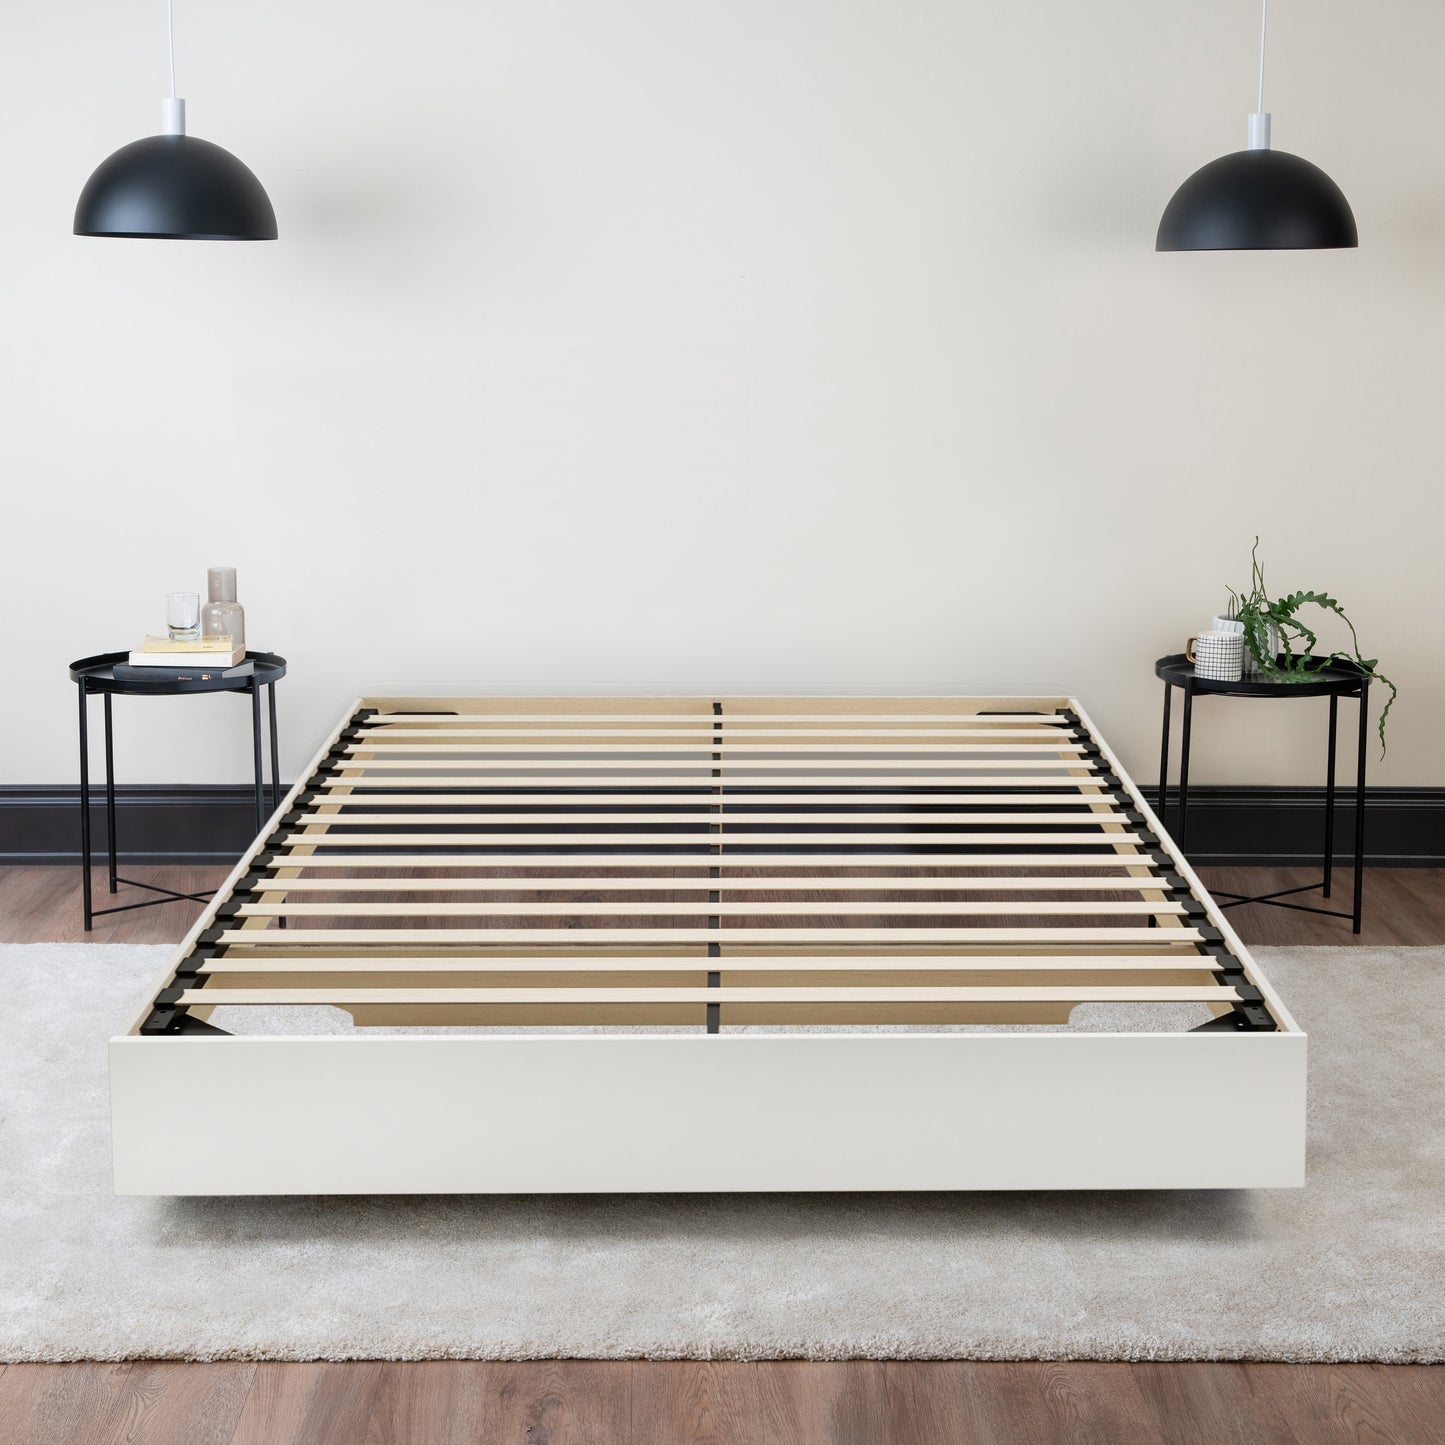 Floating Wood Bed